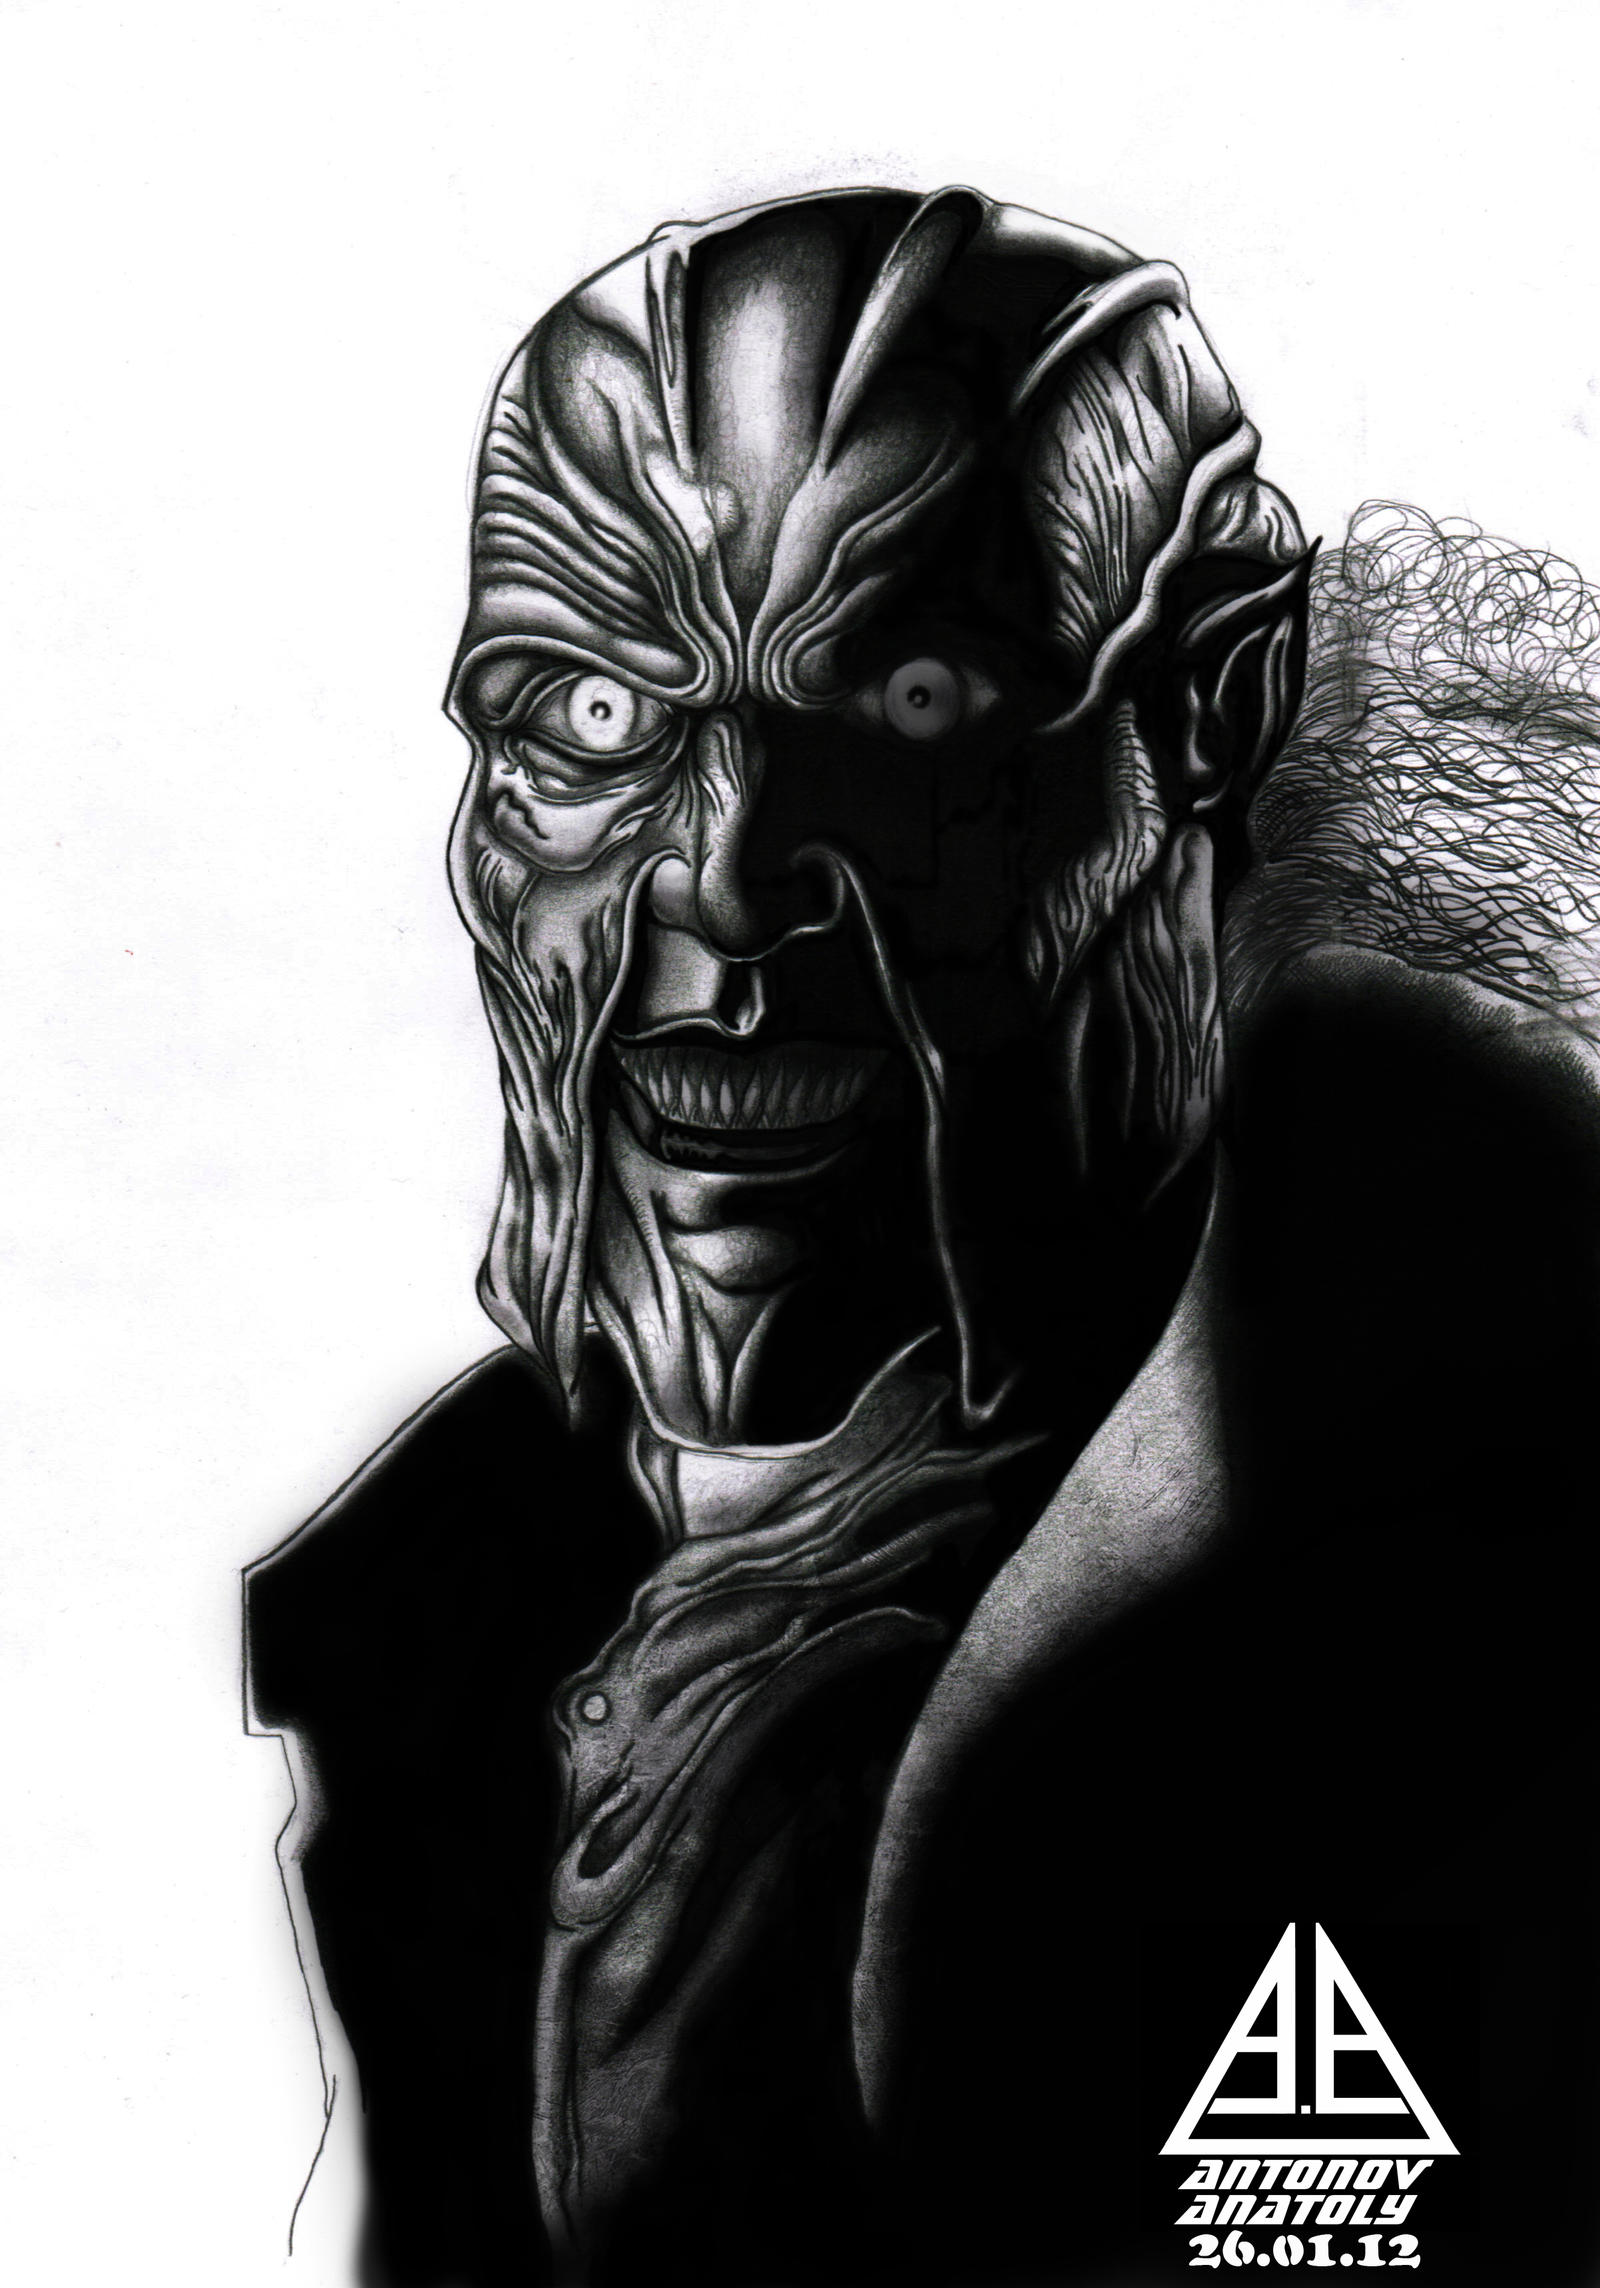 Jeepers creepers drawings - ðŸ§¡ jeepers, Creepers, Horror, Dark, Jeeperscree...